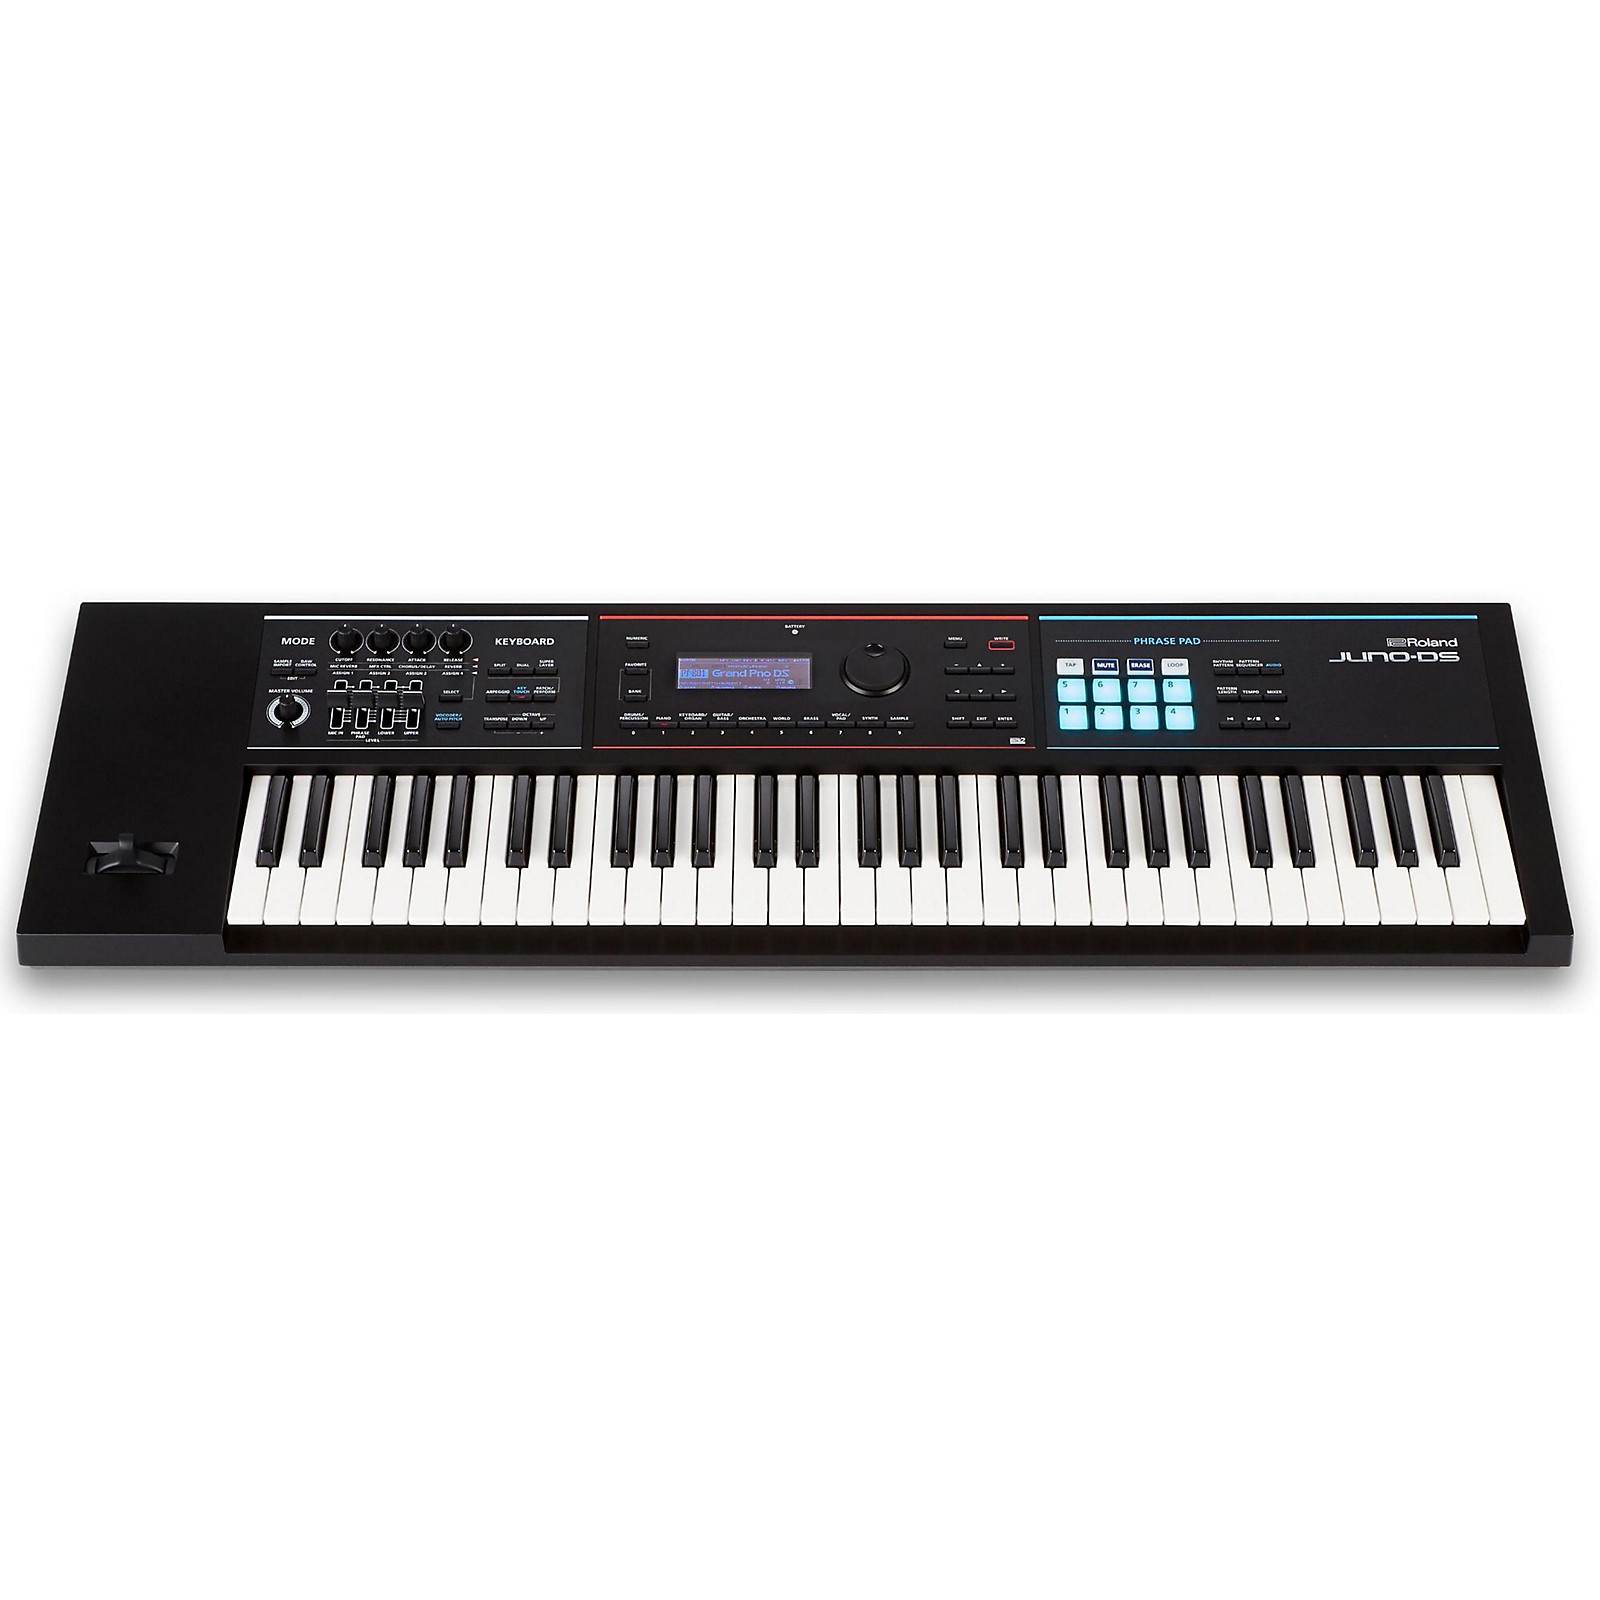 Roland JUNO-DS61 Synthesizer | Musician's Friend